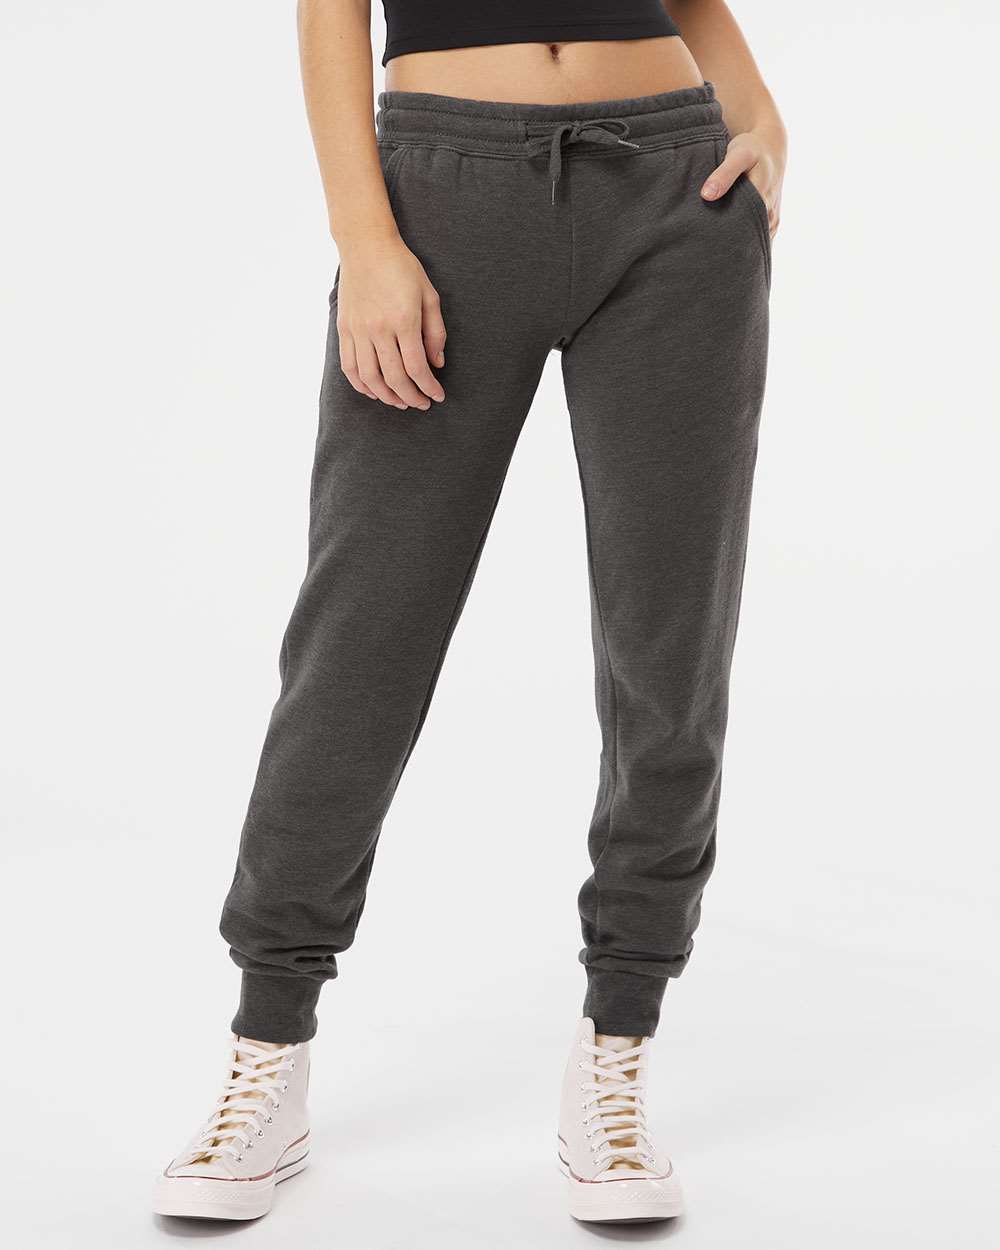  SPECIALMAGIC Women's Tapered Sweatpants with Pockets